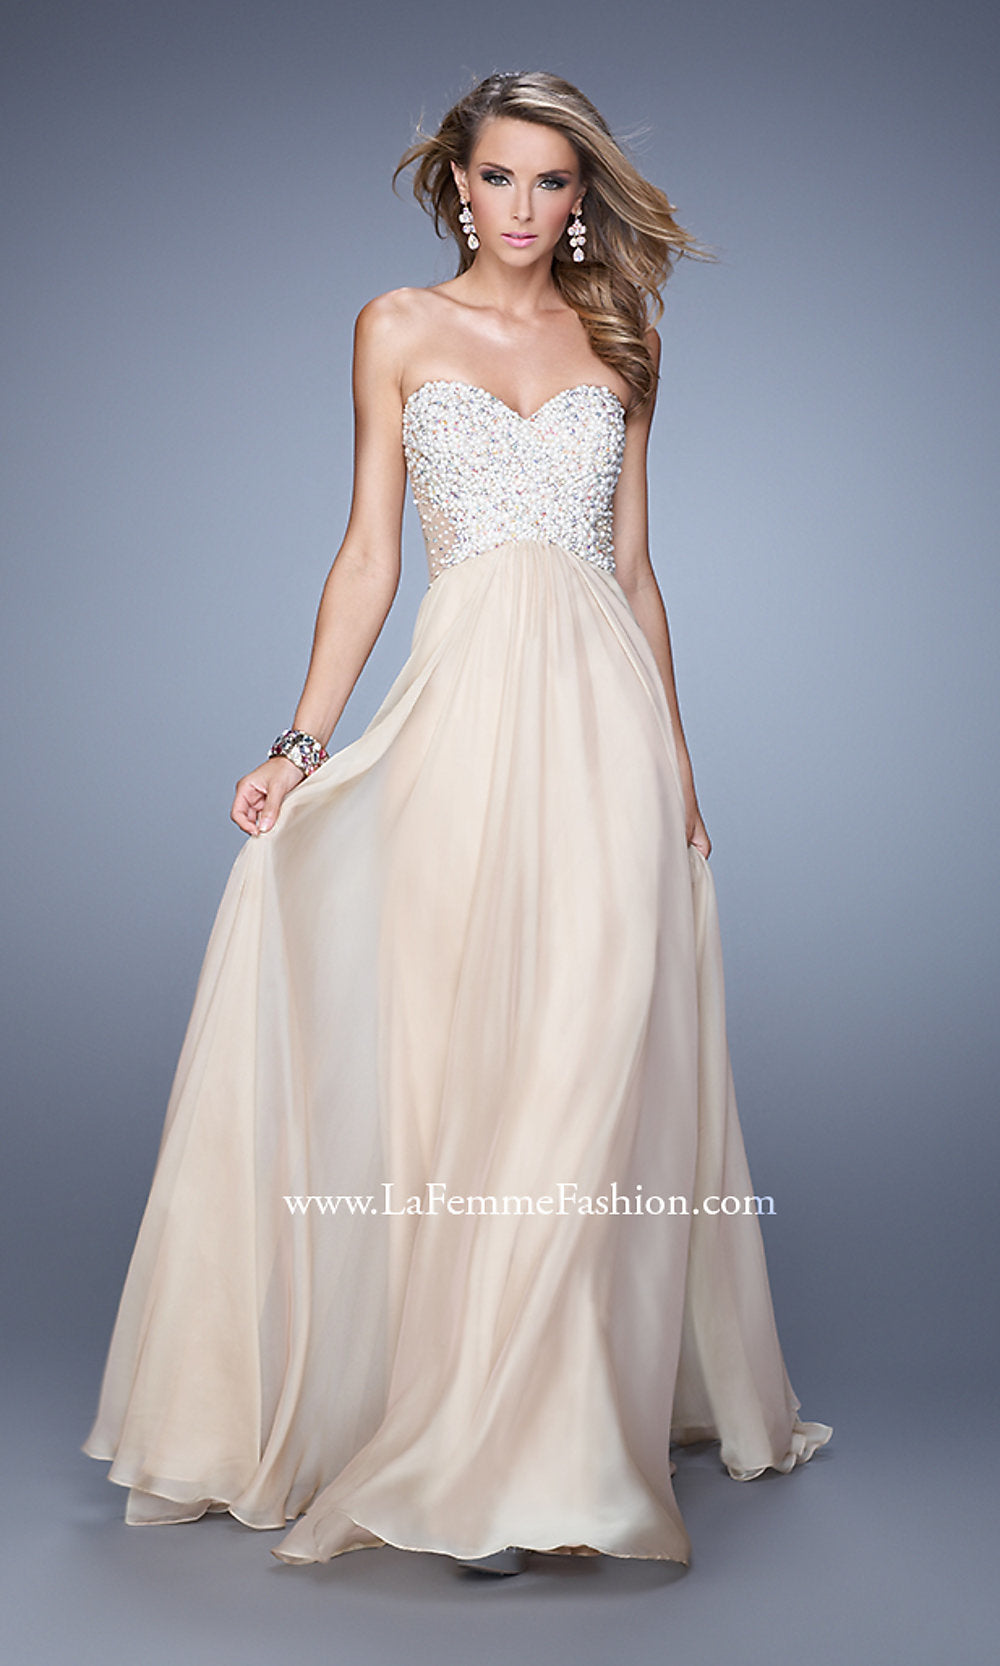  Strappy-Back Long Strapless Prom Dress with Beads